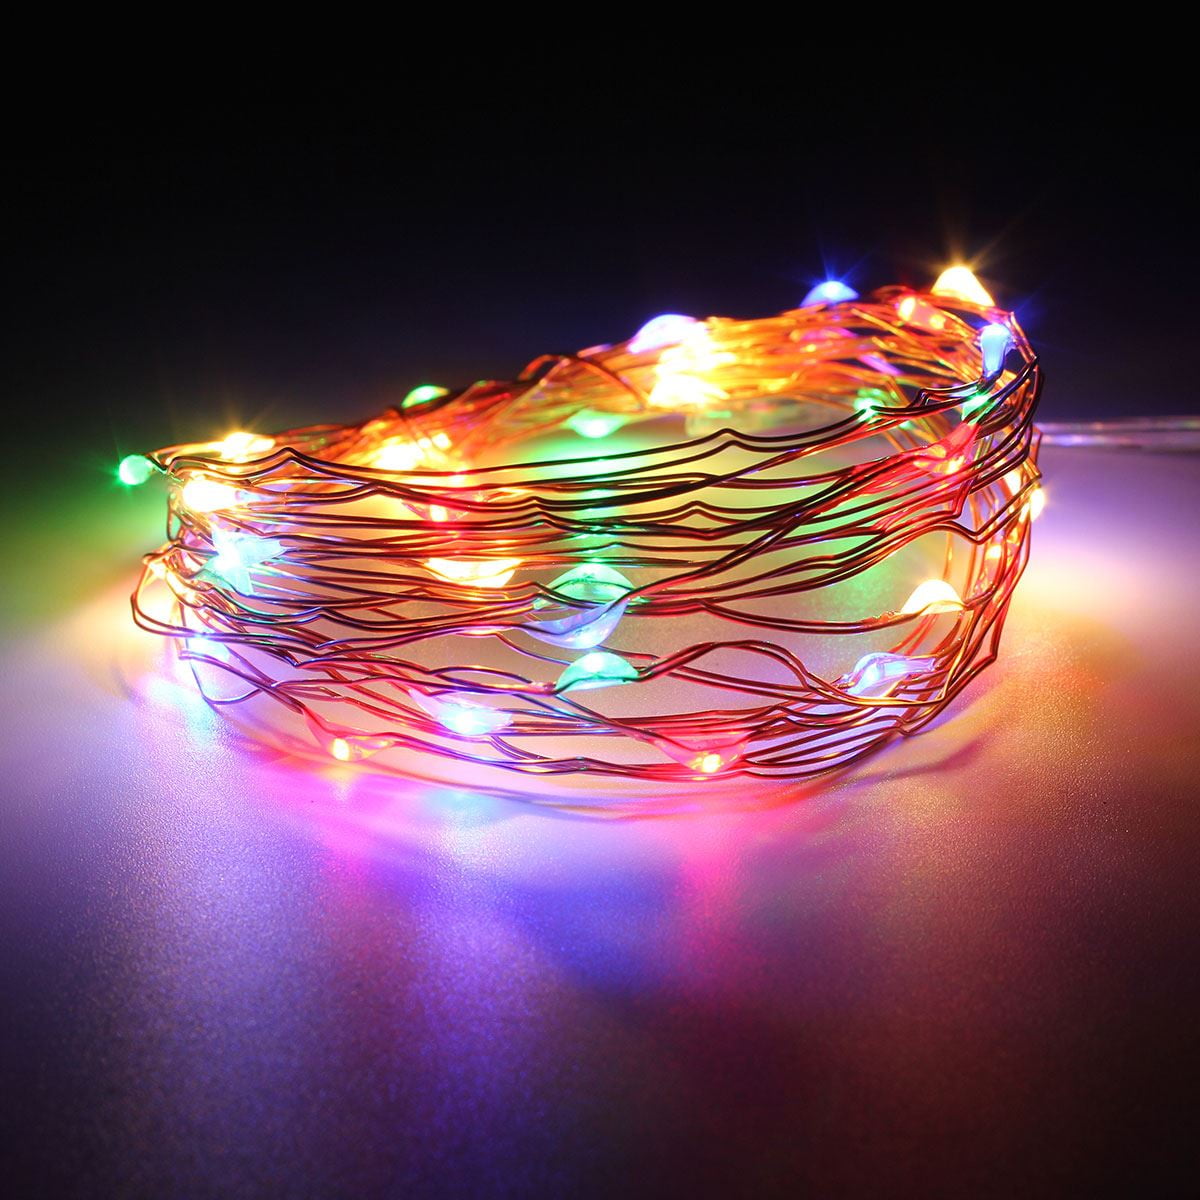 Best Price 3M 30LED Cell Battery Operated Micro Wire String Fairy lights Party@ 